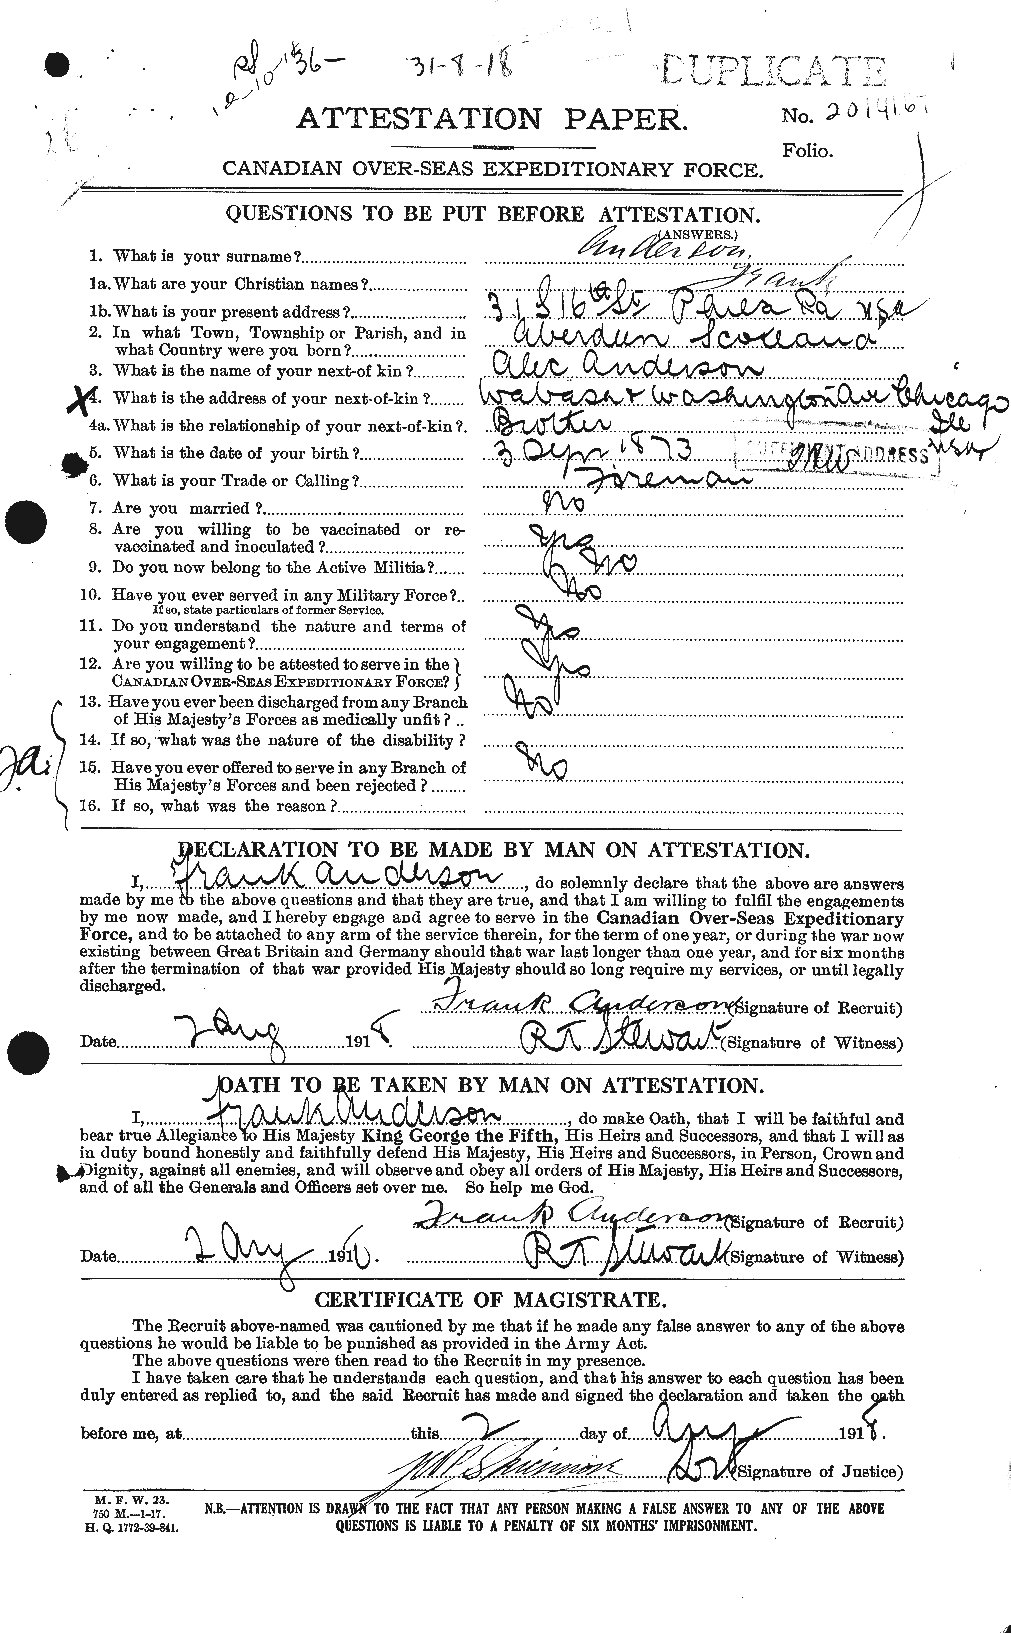 Personnel Records of the First World War - CEF 209862a